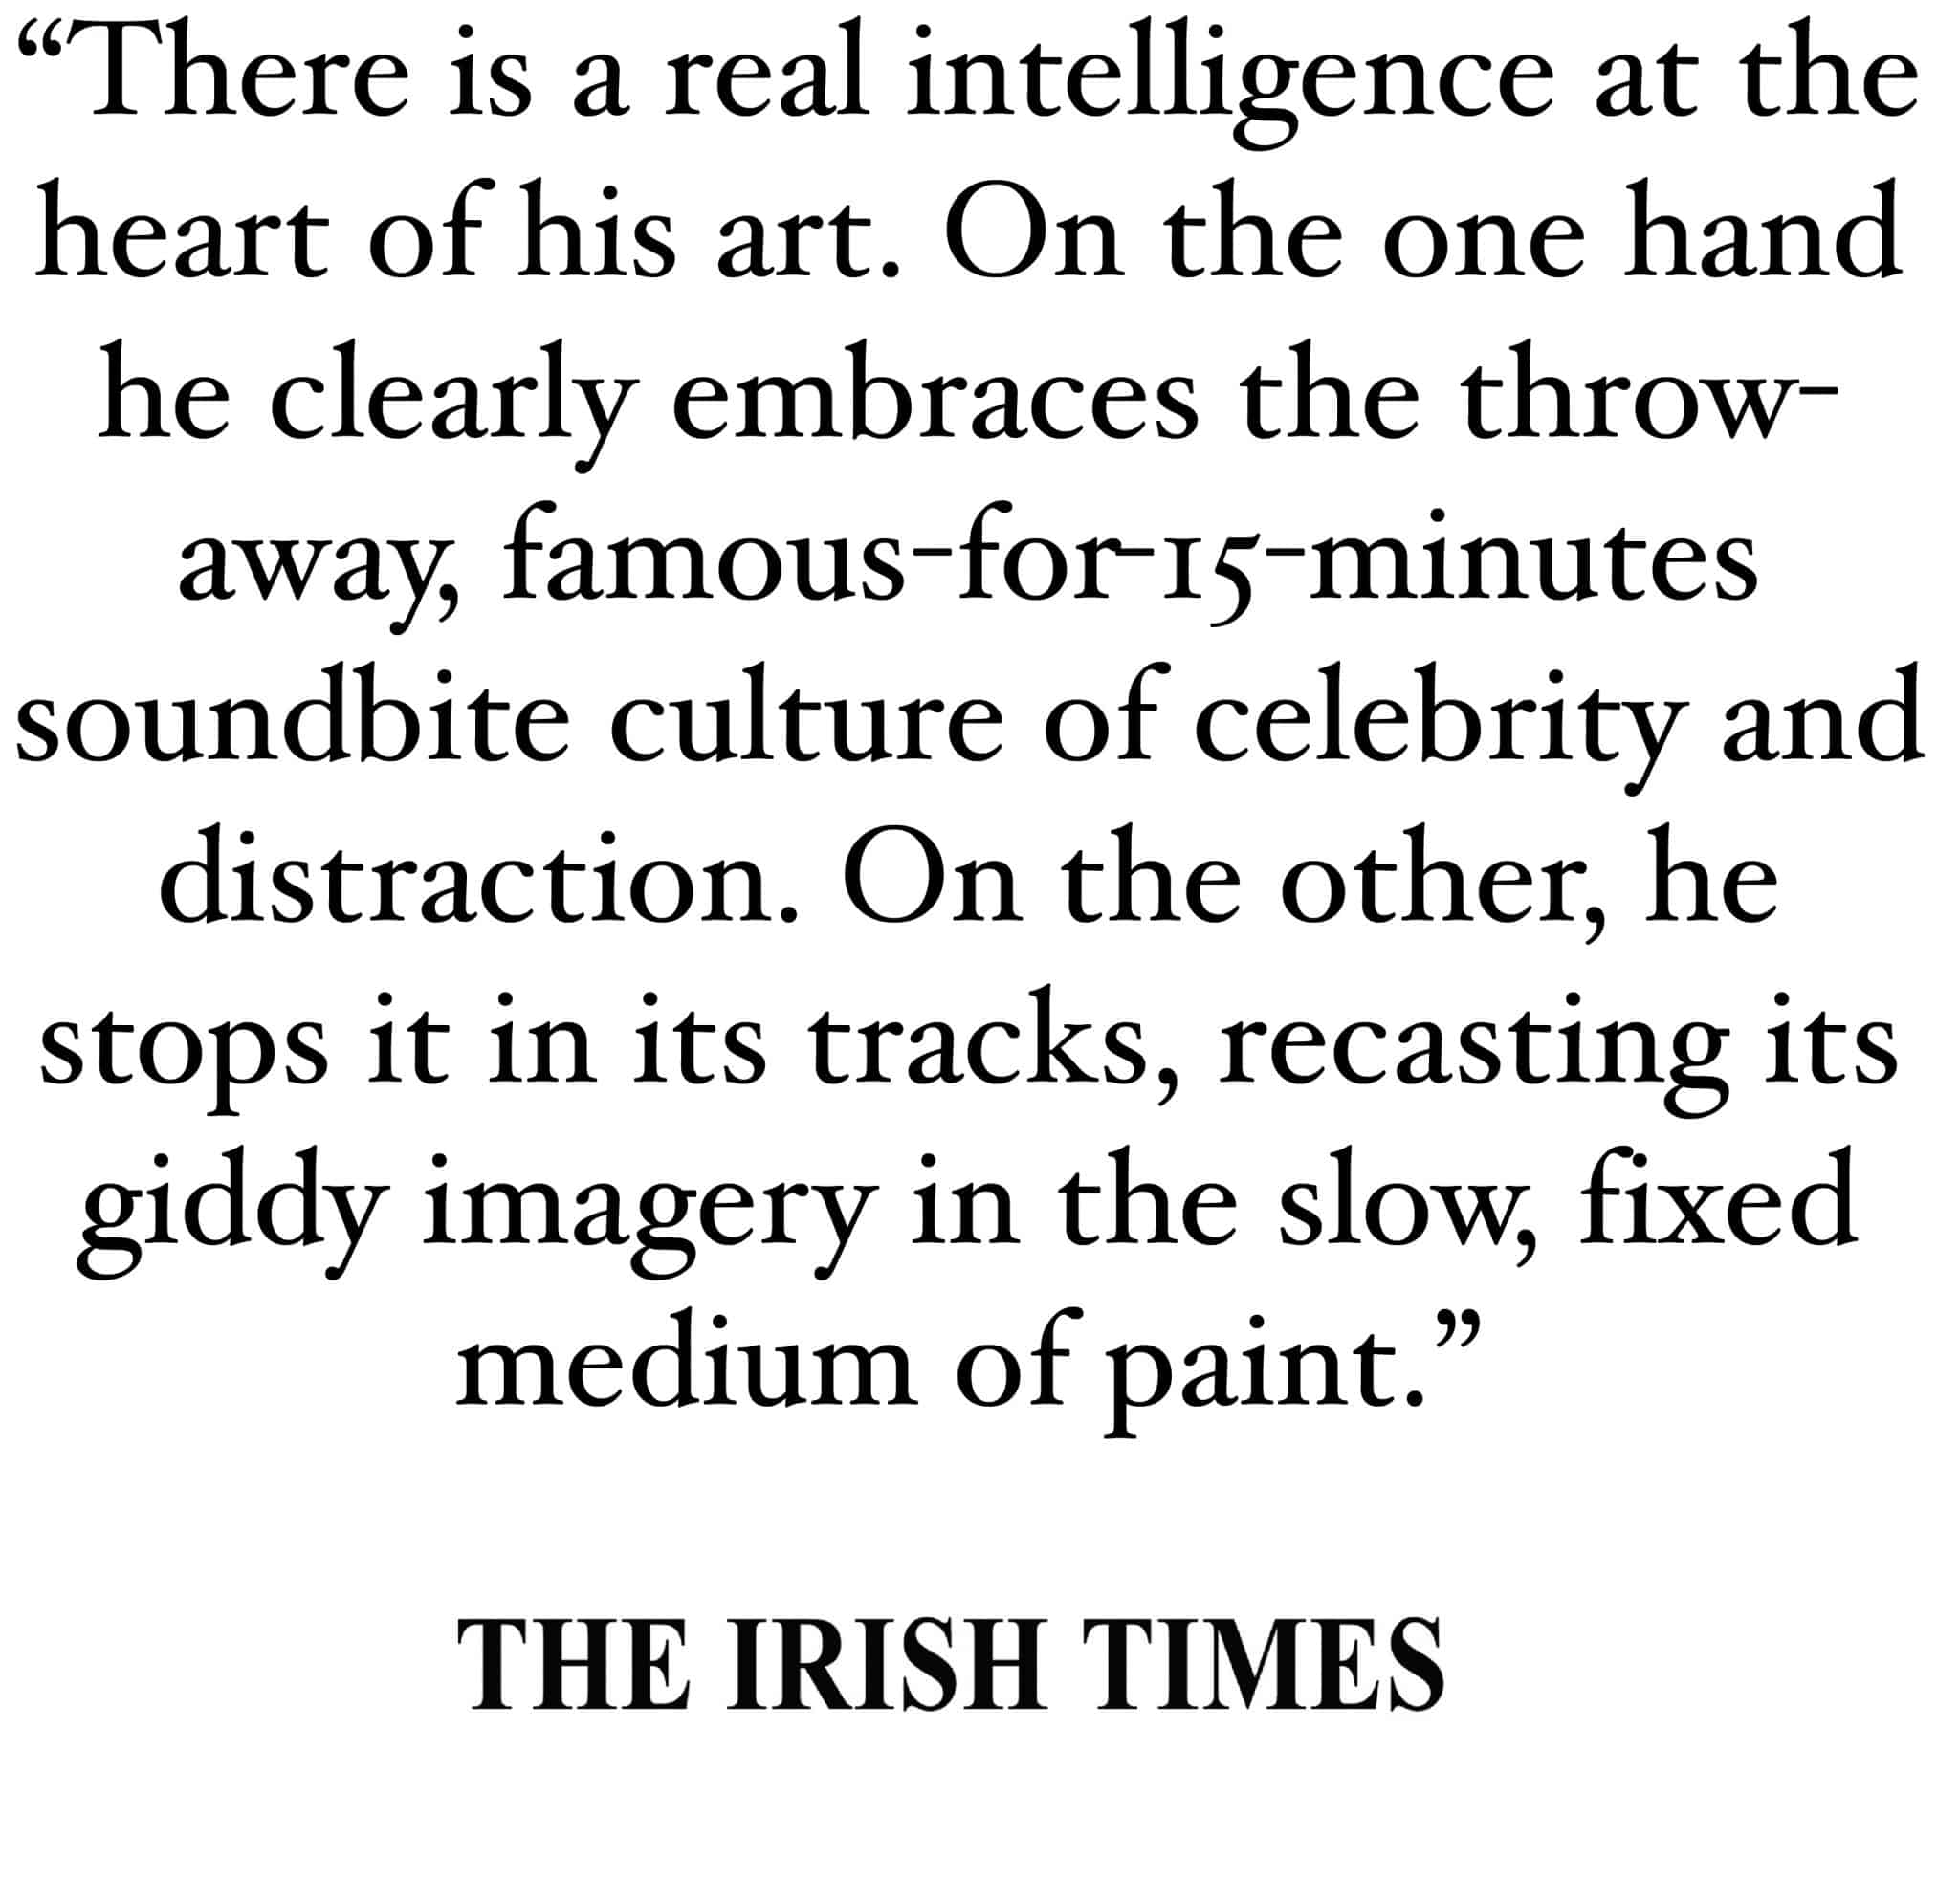 The Irish Times “Cloudy with a chance of artistic smiley faces” Aidan Dunne, January 6 2014